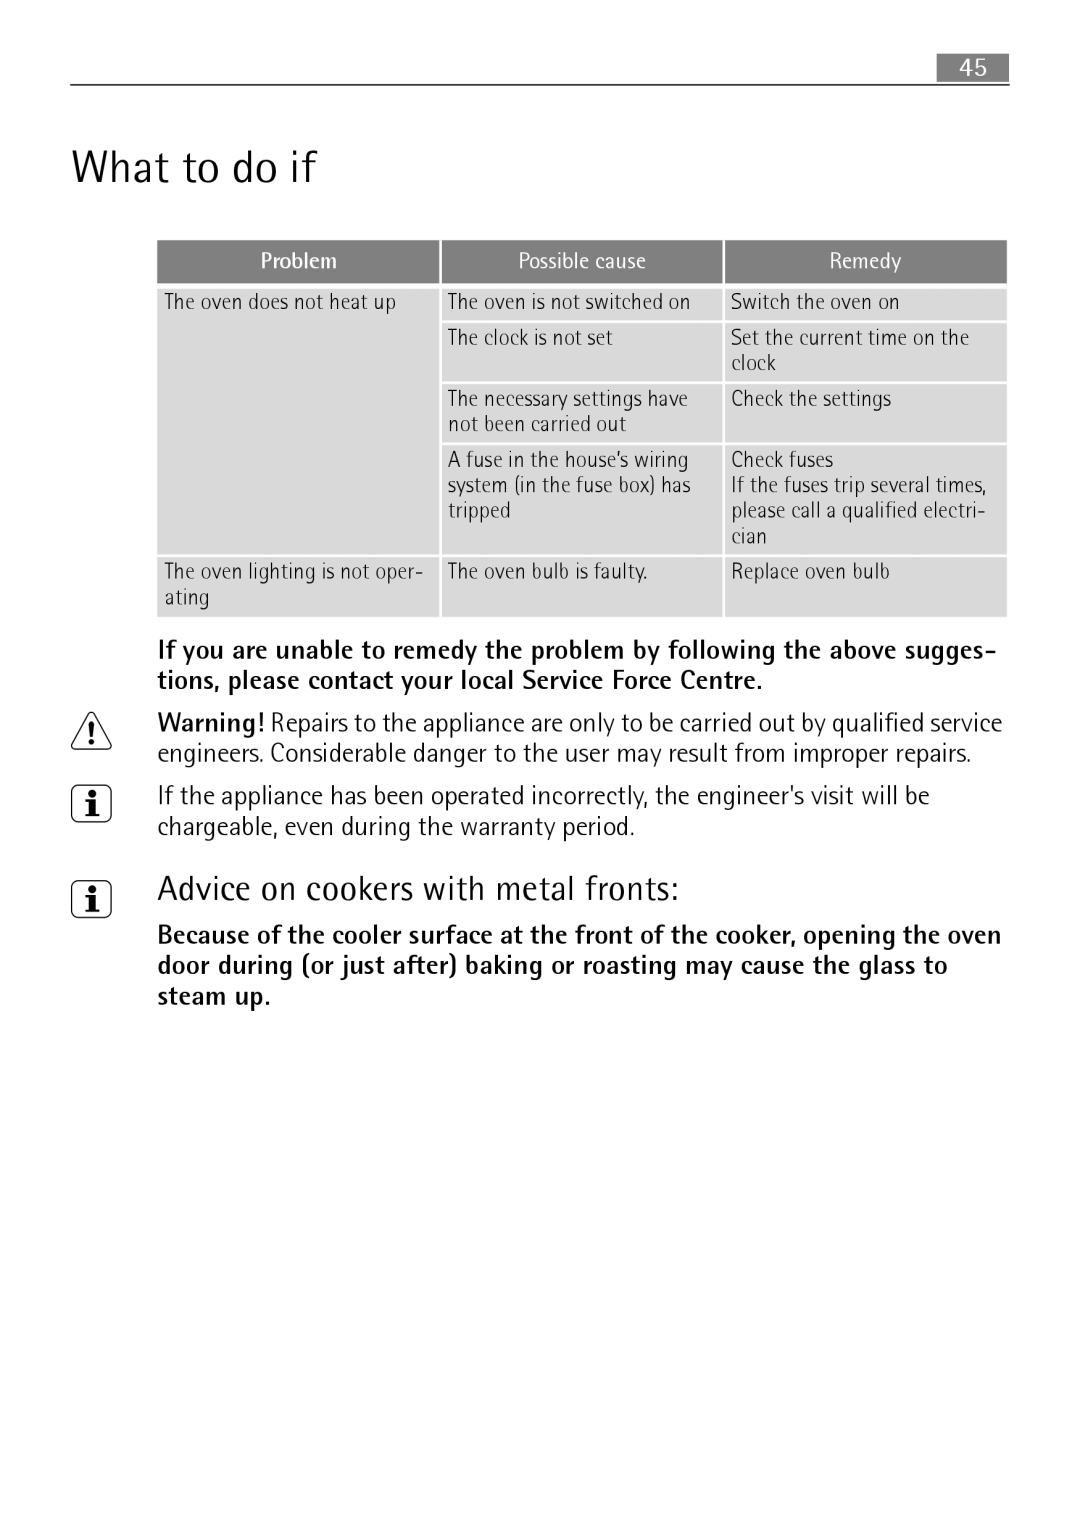 Electrolux B3101-5 user manual What to do if …, Advice on cookers with metal fronts 